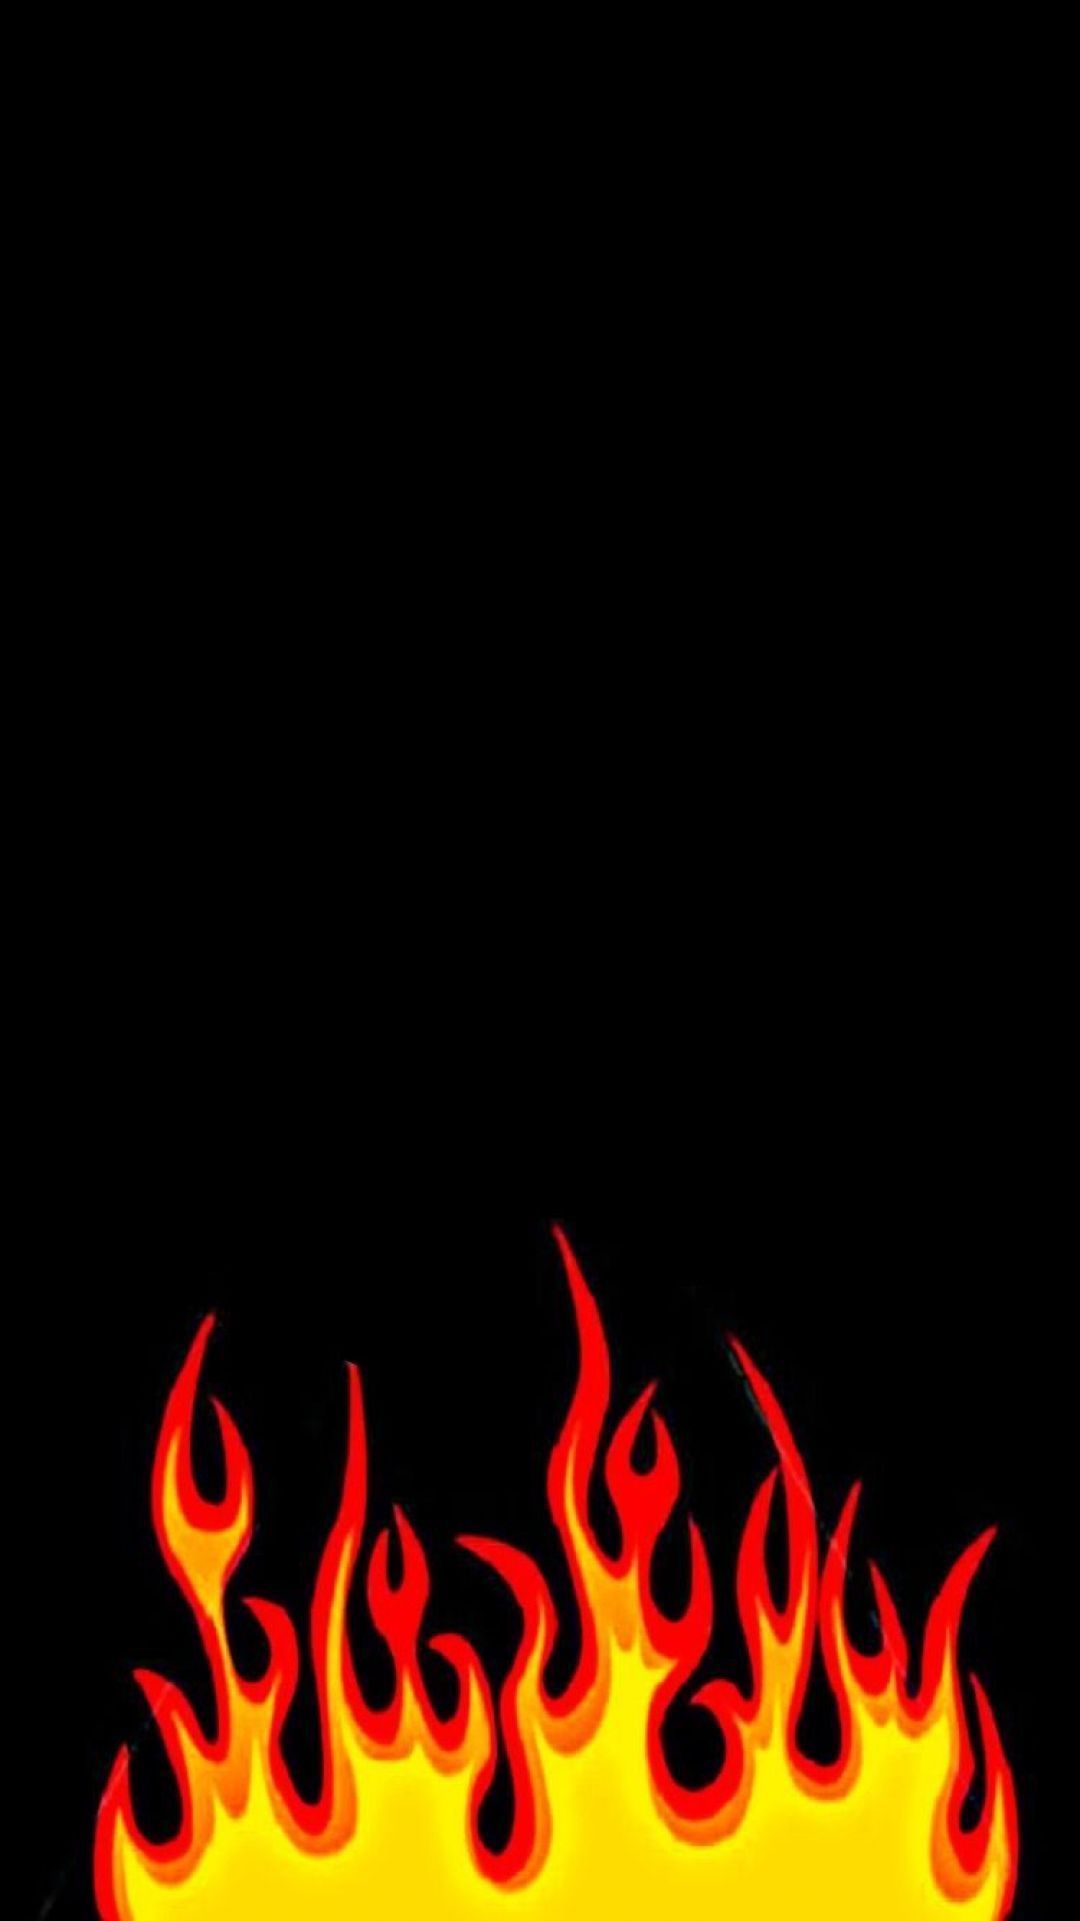 Fire flame background on a black background - Fire, flames